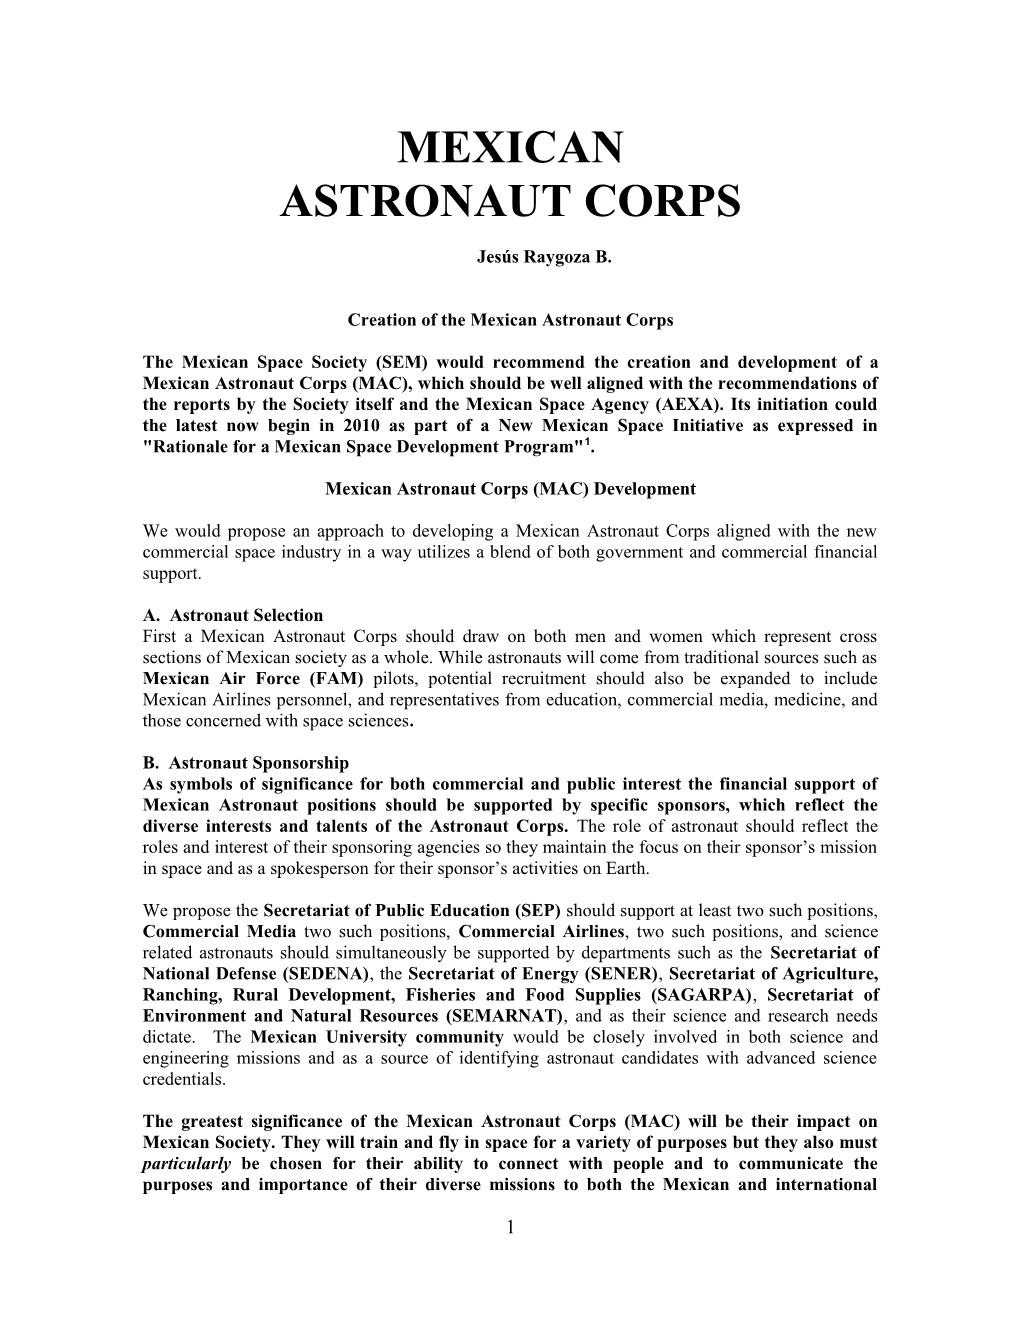 Creation of the Mexican Astronaut Corps